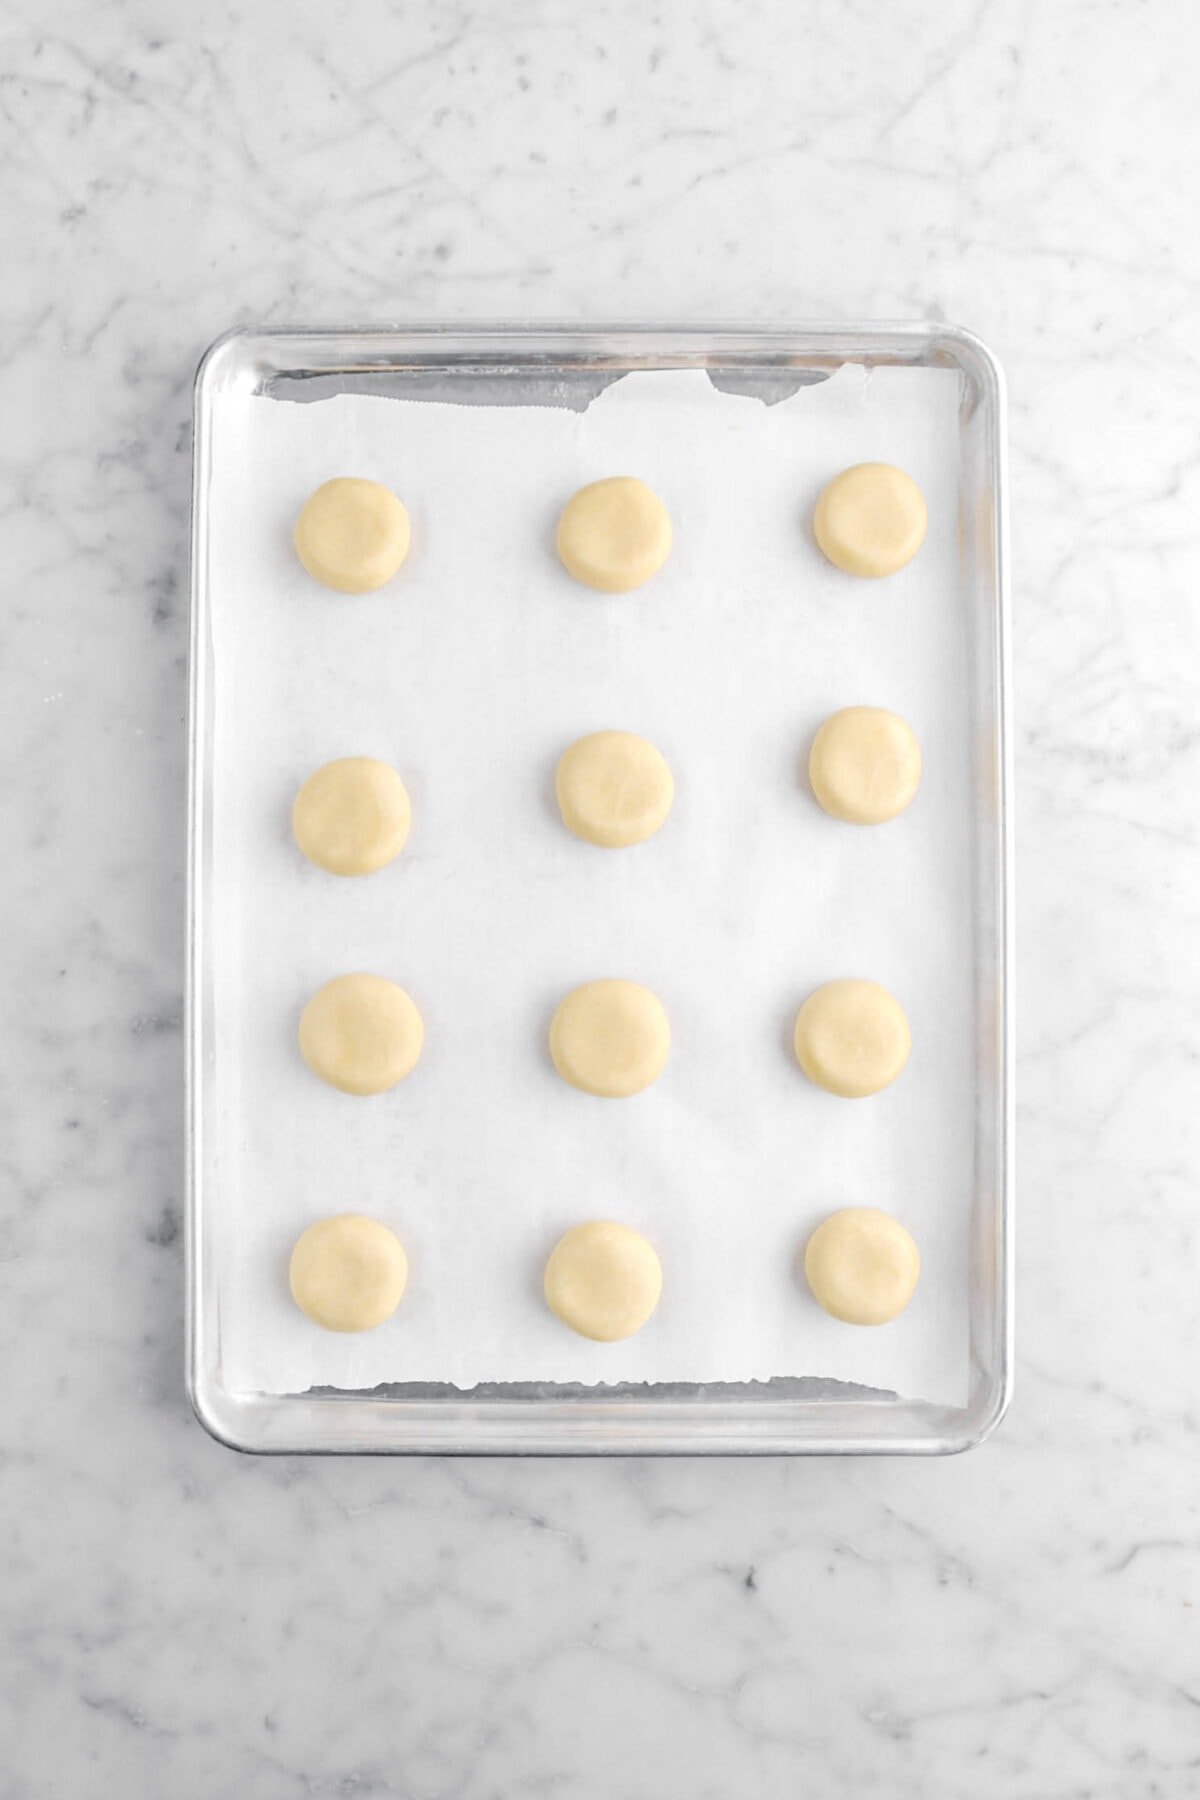 cookie dough balls flattened slightly on lined sheet pan.